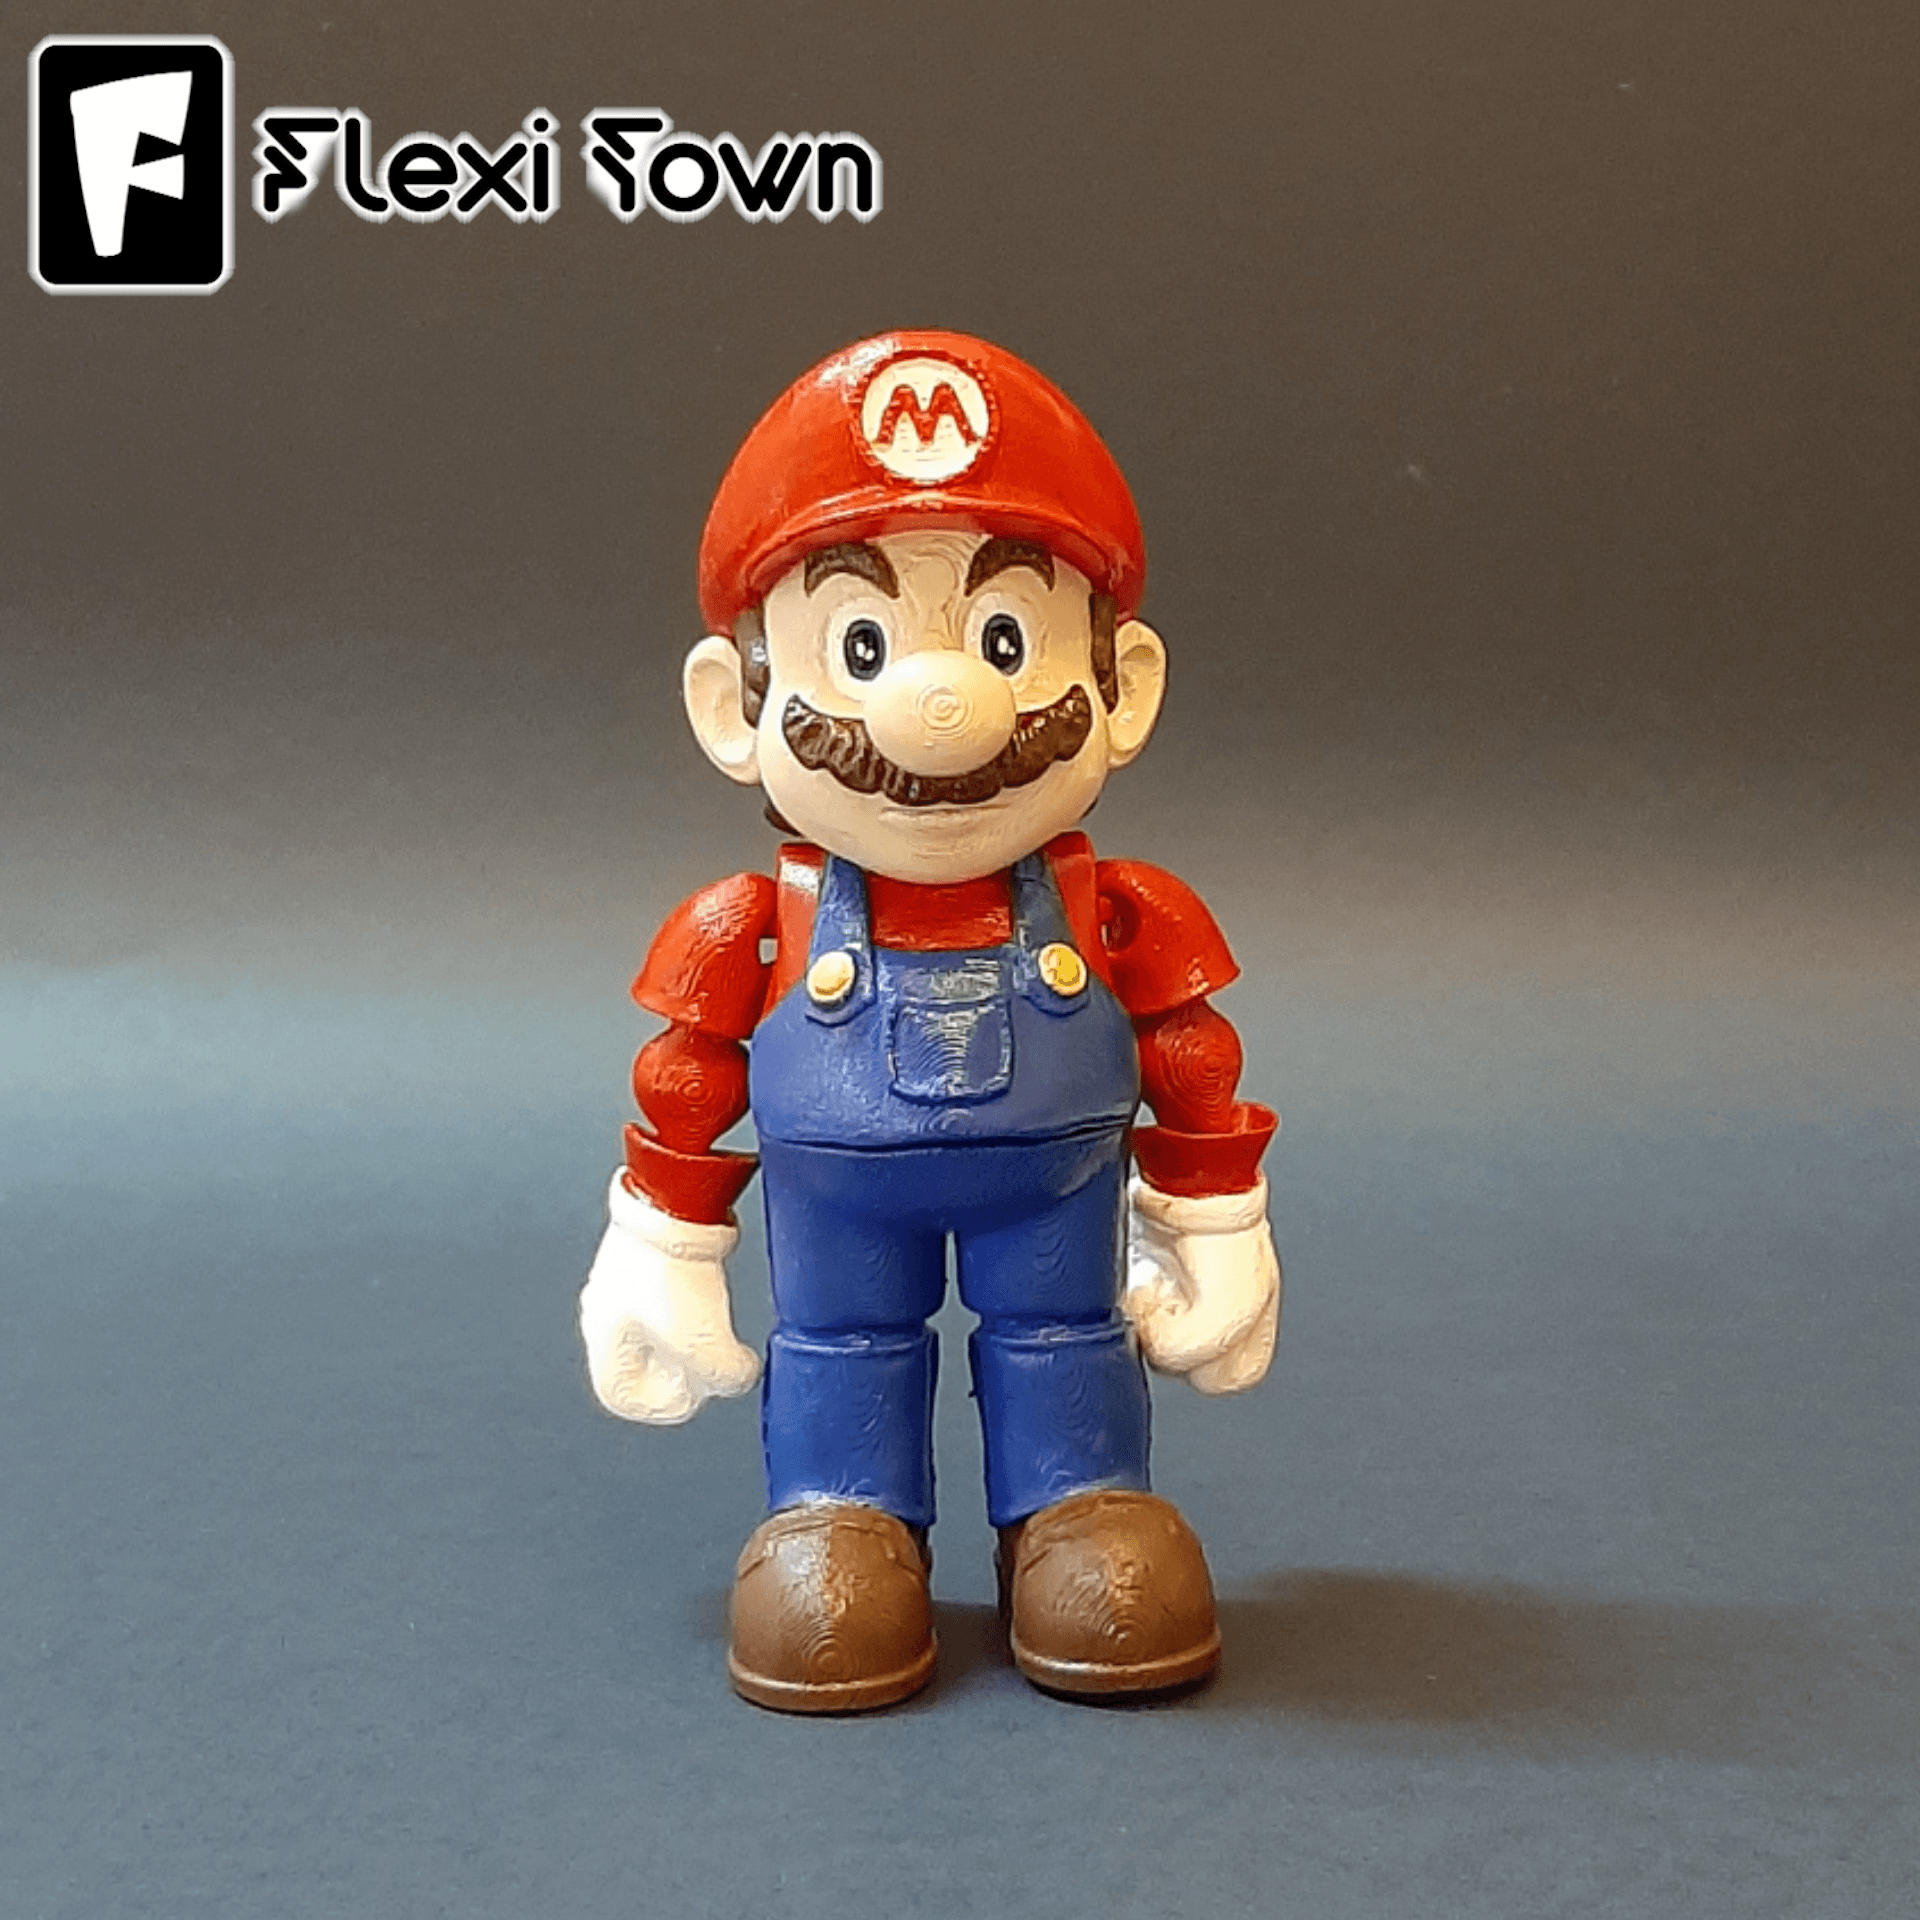 🎉 Exciting New Model: Flexi Mario Now Available! 🎉